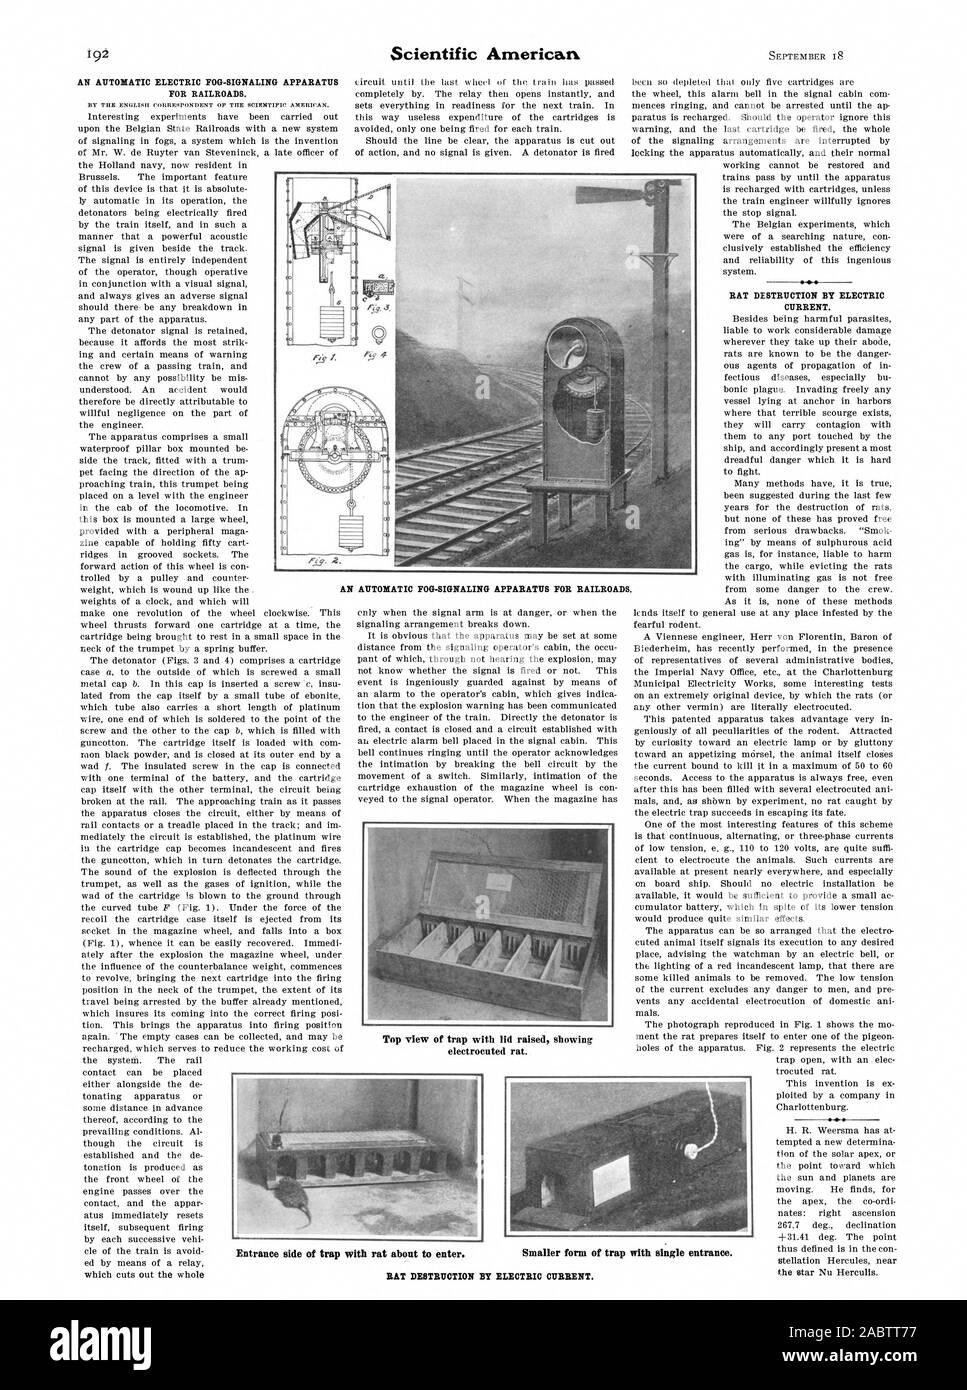 Entrance side of trap with rat about to enter. Smaller form of trap with single entrance., scientific american, -1909-09-18 Stock Photo